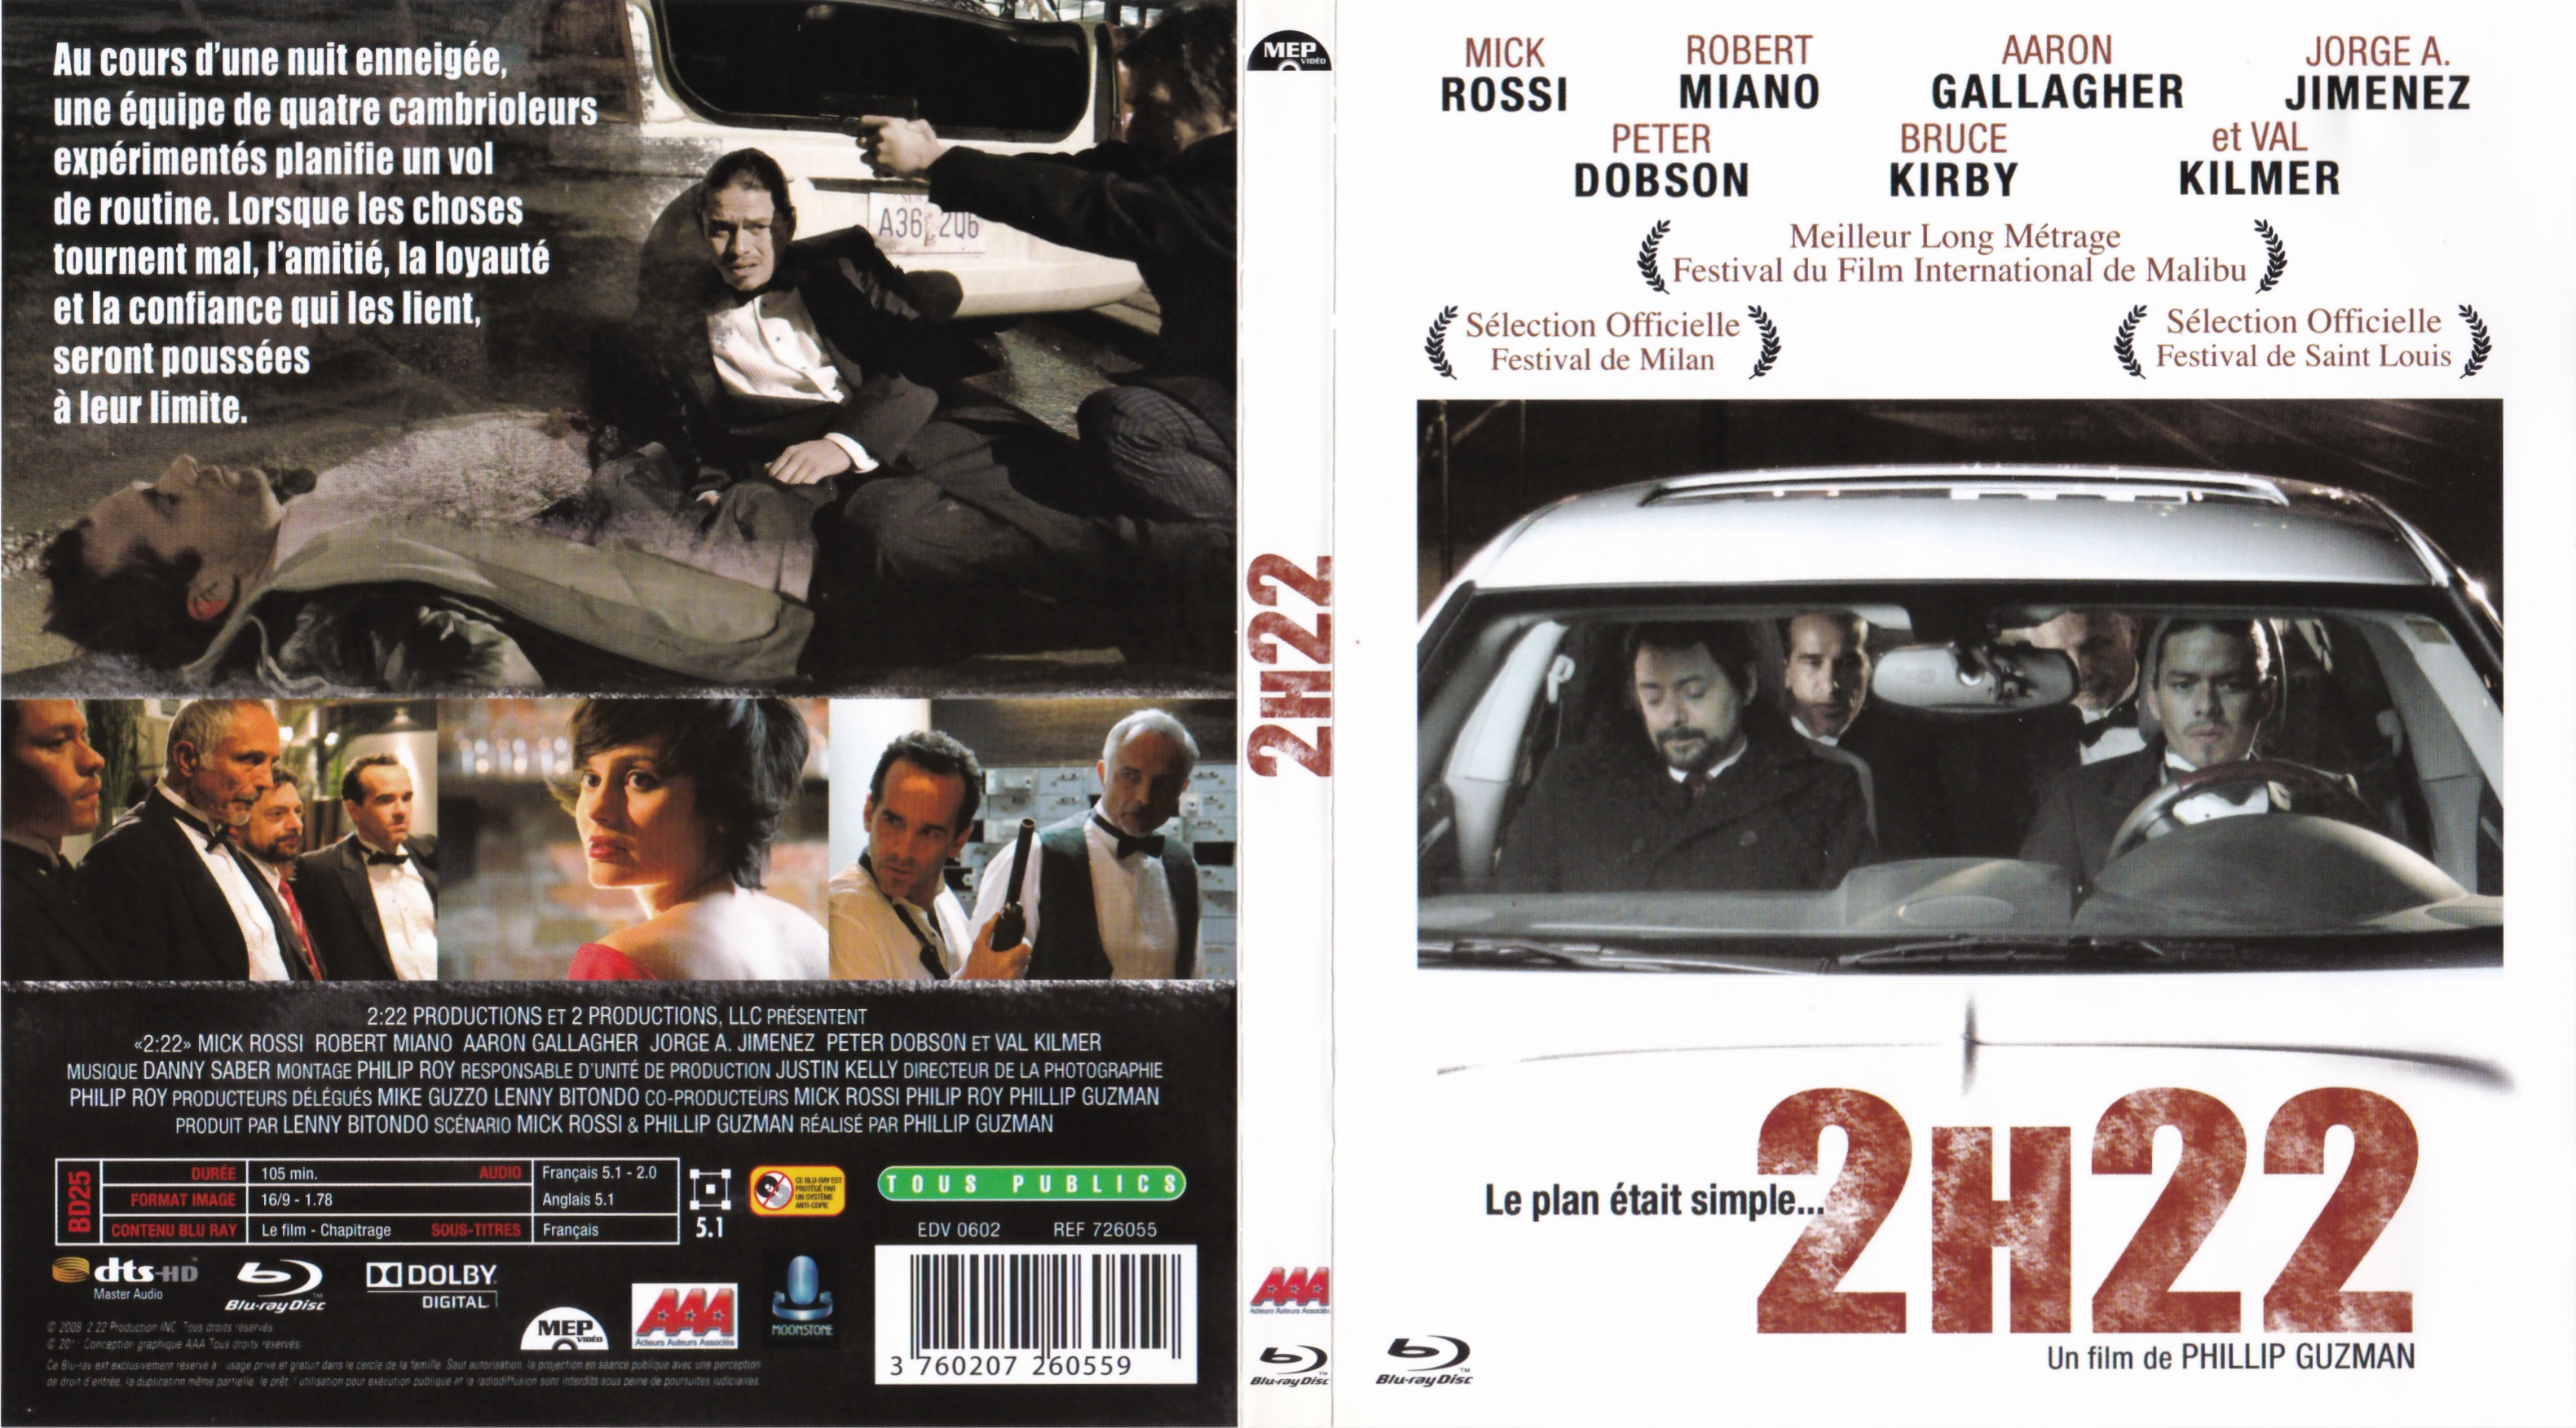 Jaquette DVD 2H22 (BLU-RAY)